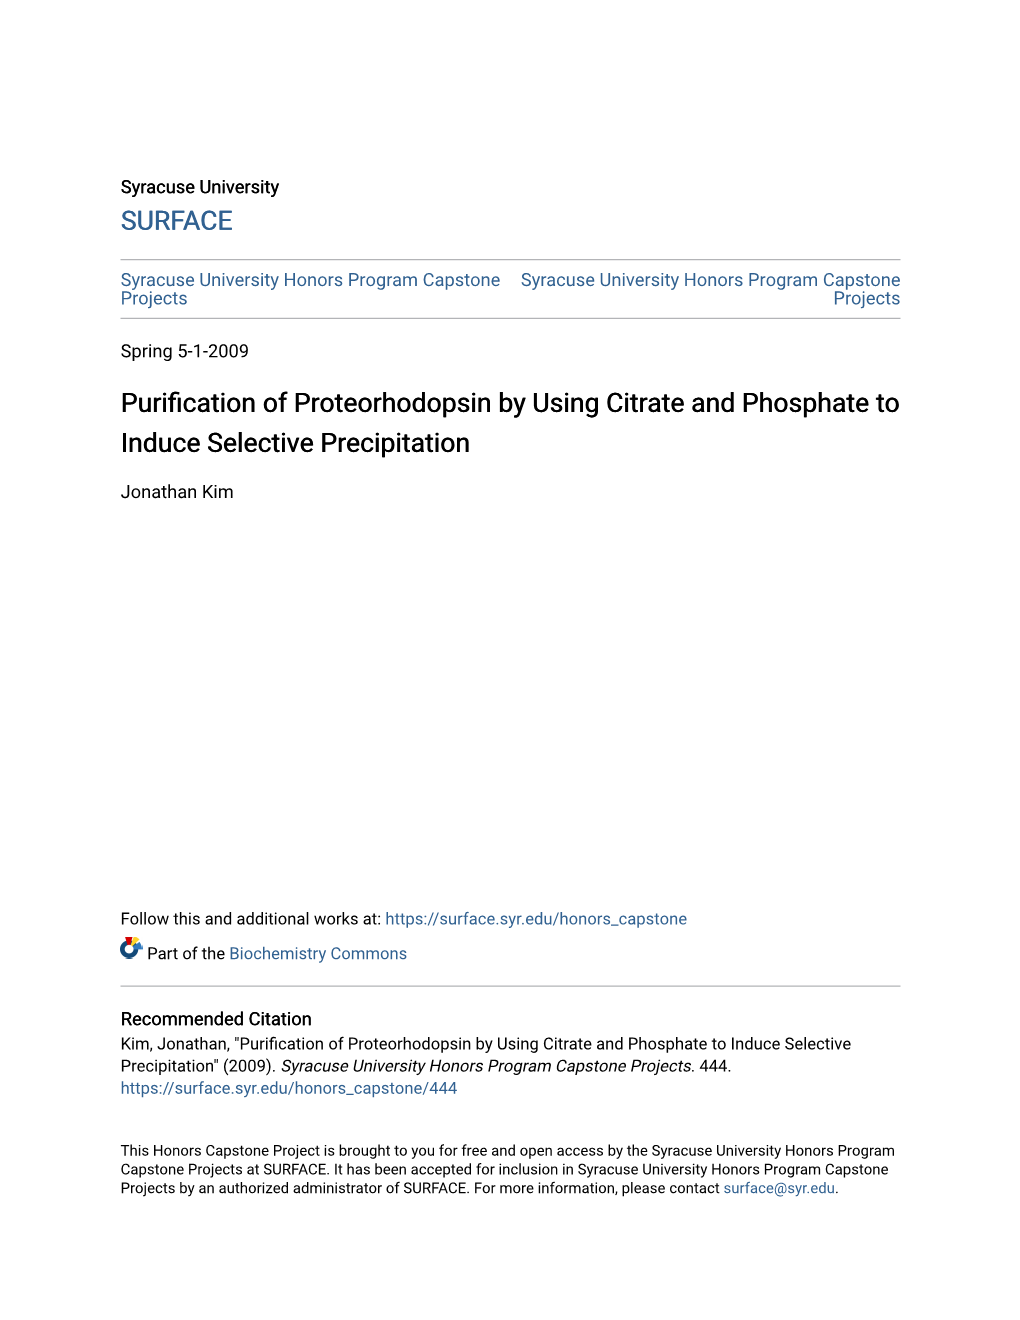 Purification of Proteorhodopsin by Using Citrate and Phosphate to Induce Selective Precipitation